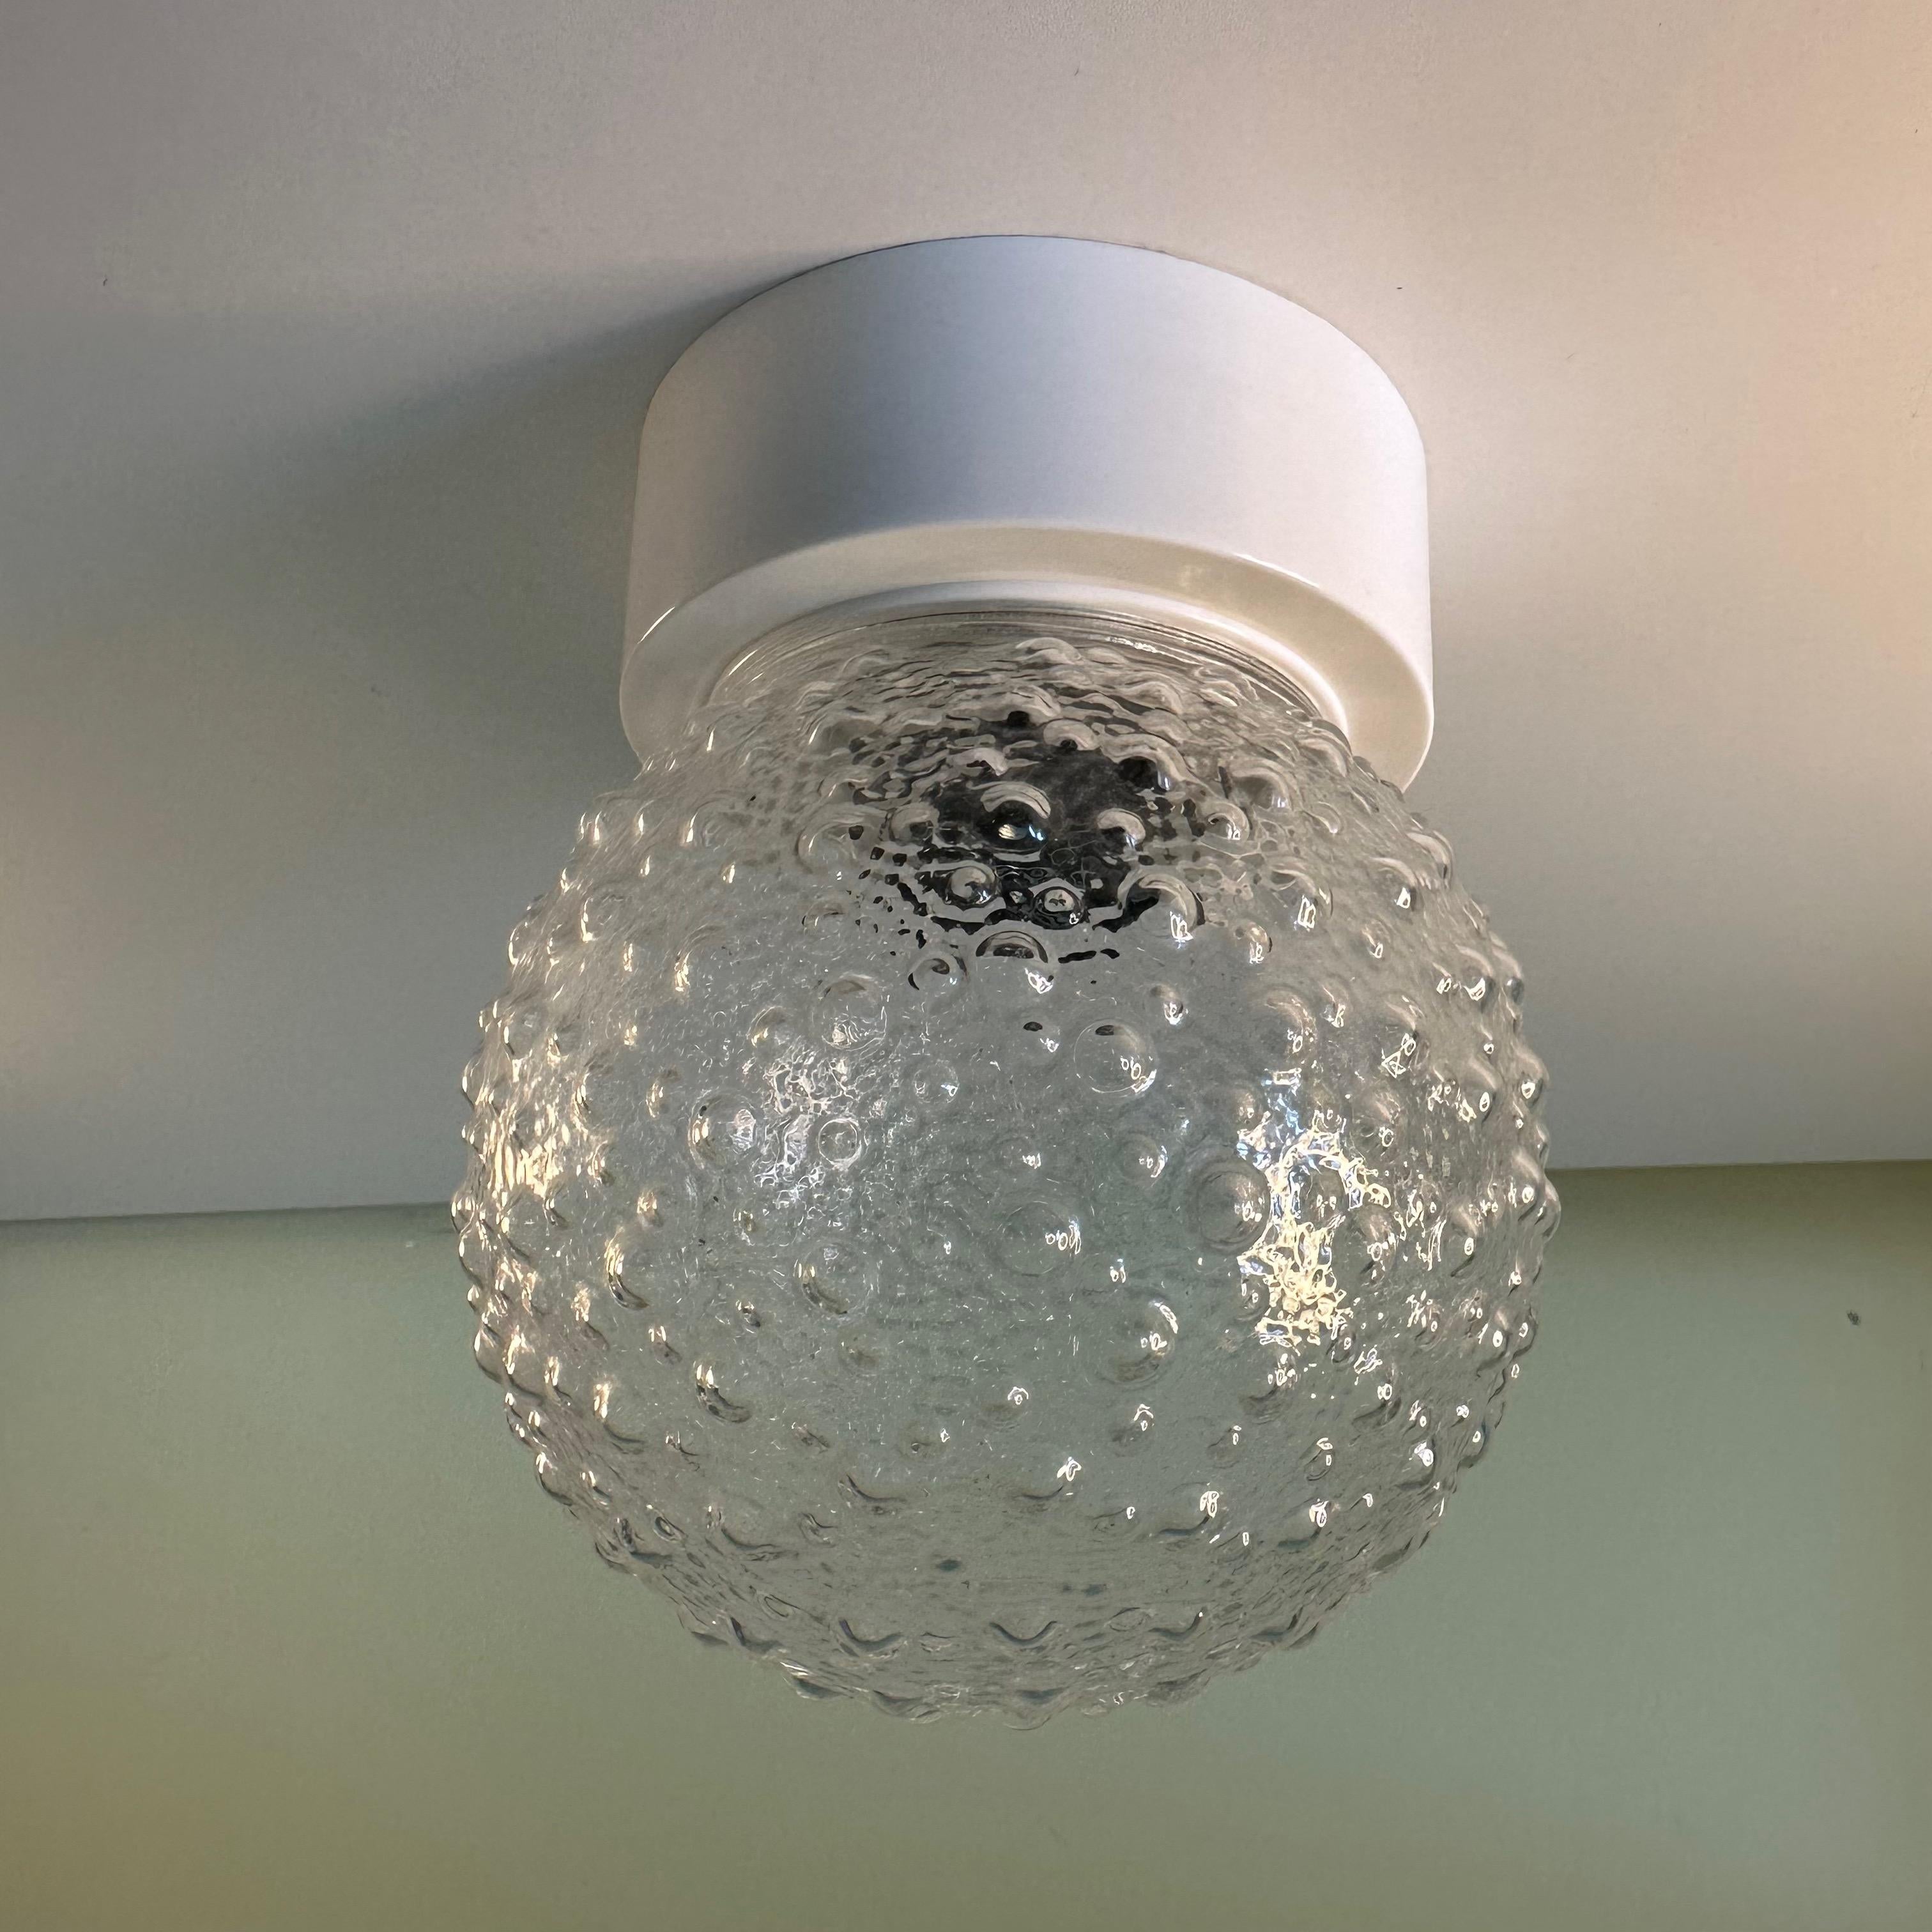 Small Vintage clear and white plastic bubble textured globe flush mount lamp or wall light sconce. This is a small and charming lamp fixture with a space age vibe is a 2 part light comprised of a clear spherical plastic globe molded with a dotted,